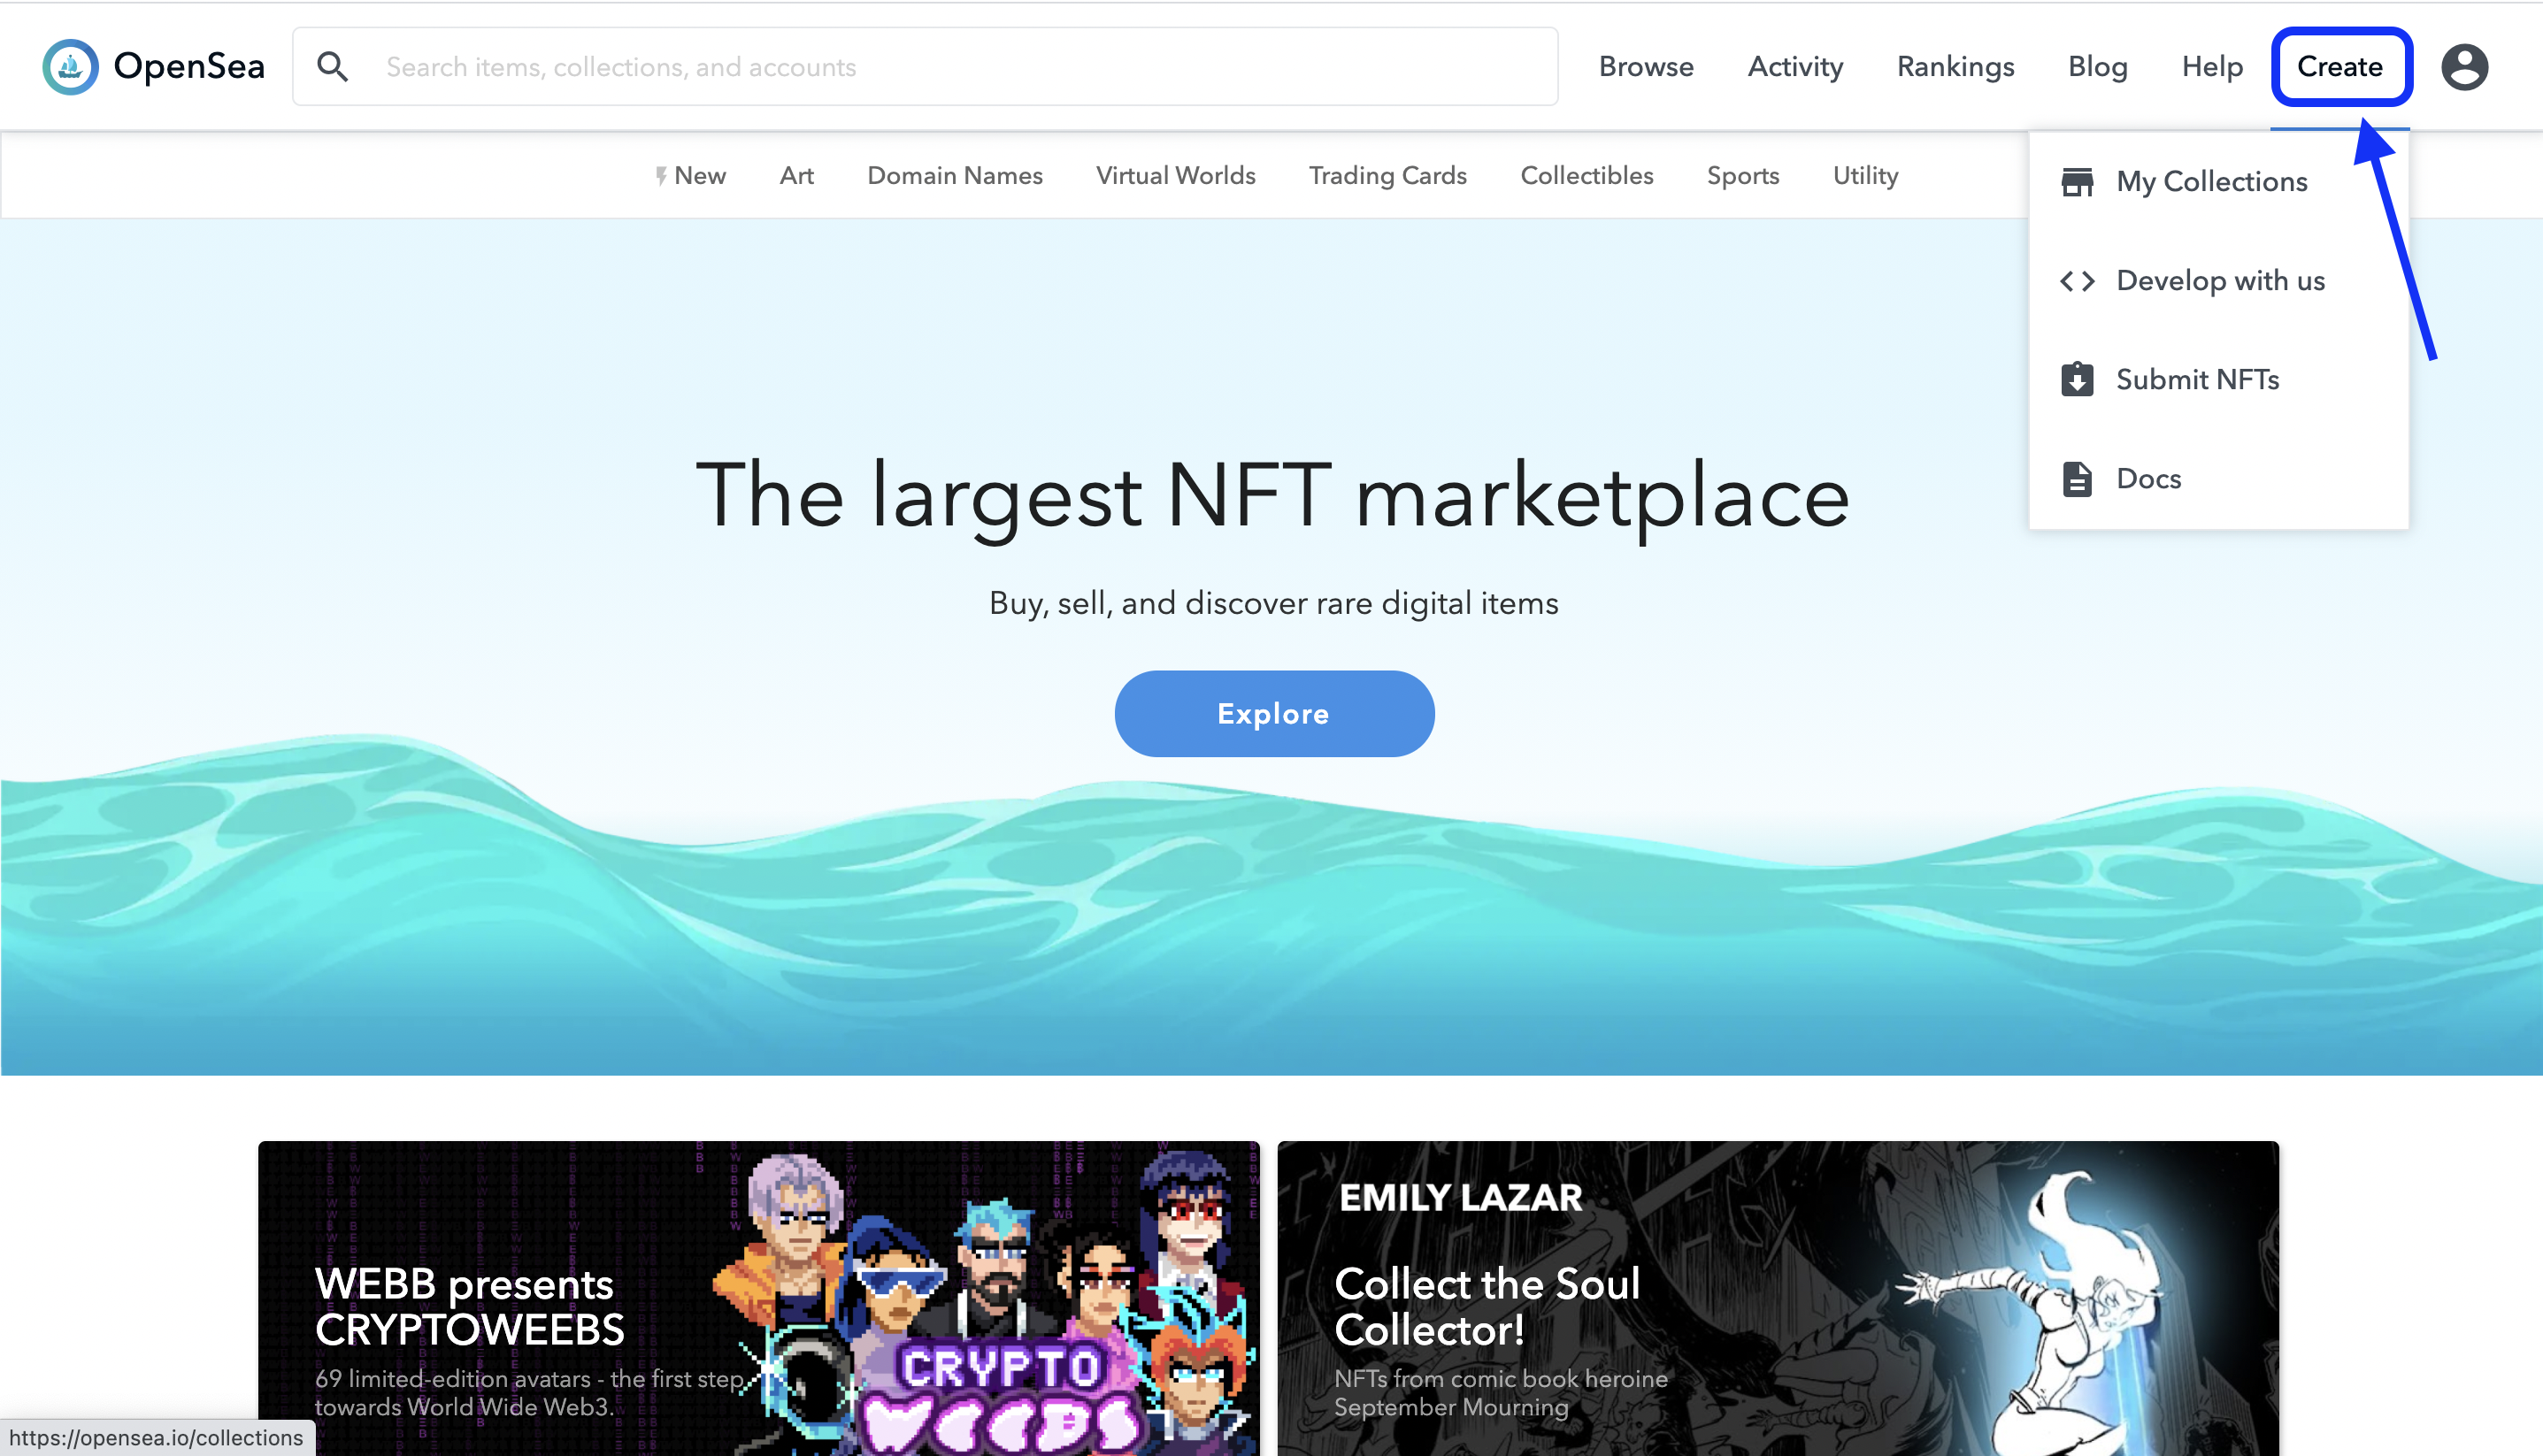 NFTs: How to Create, Buy and Sell NFTs